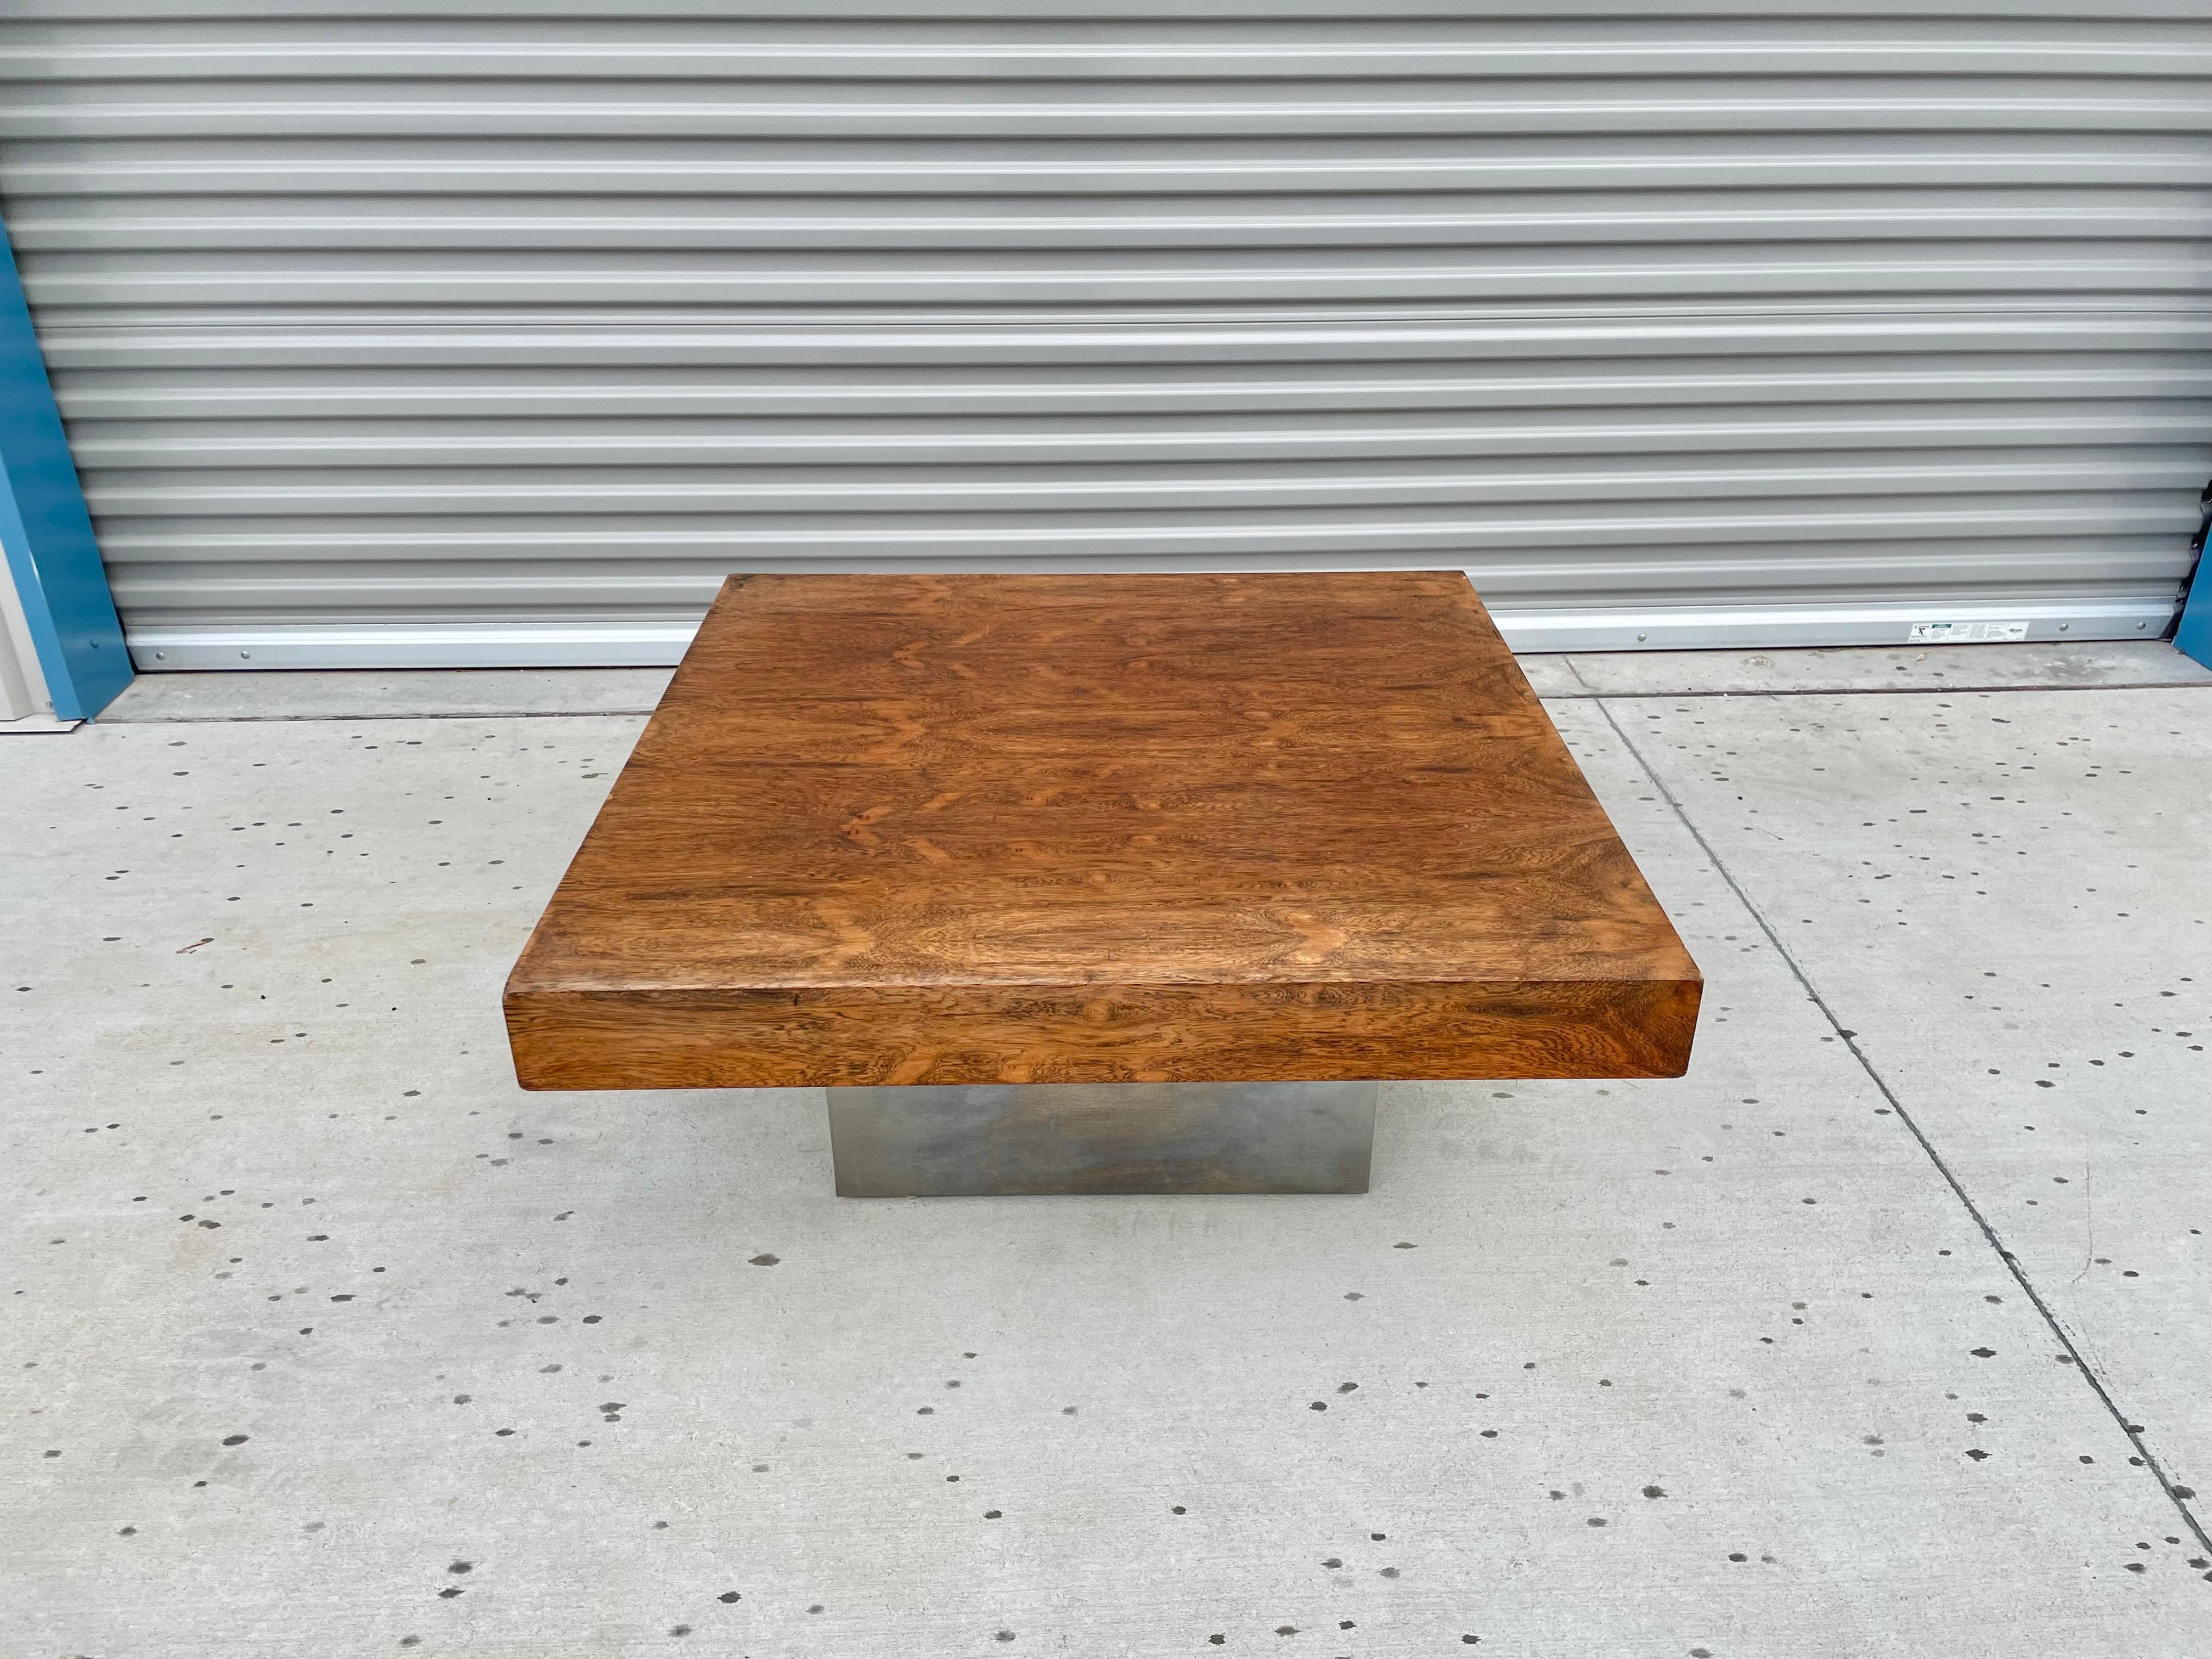 Mid-century modern rosewood & chrome coffee table designed and manufactured in the United States circa 1970s. This stunning coffee table features a rosewood top that sits on top of a chrome base giving it a great distinctive design for their era.